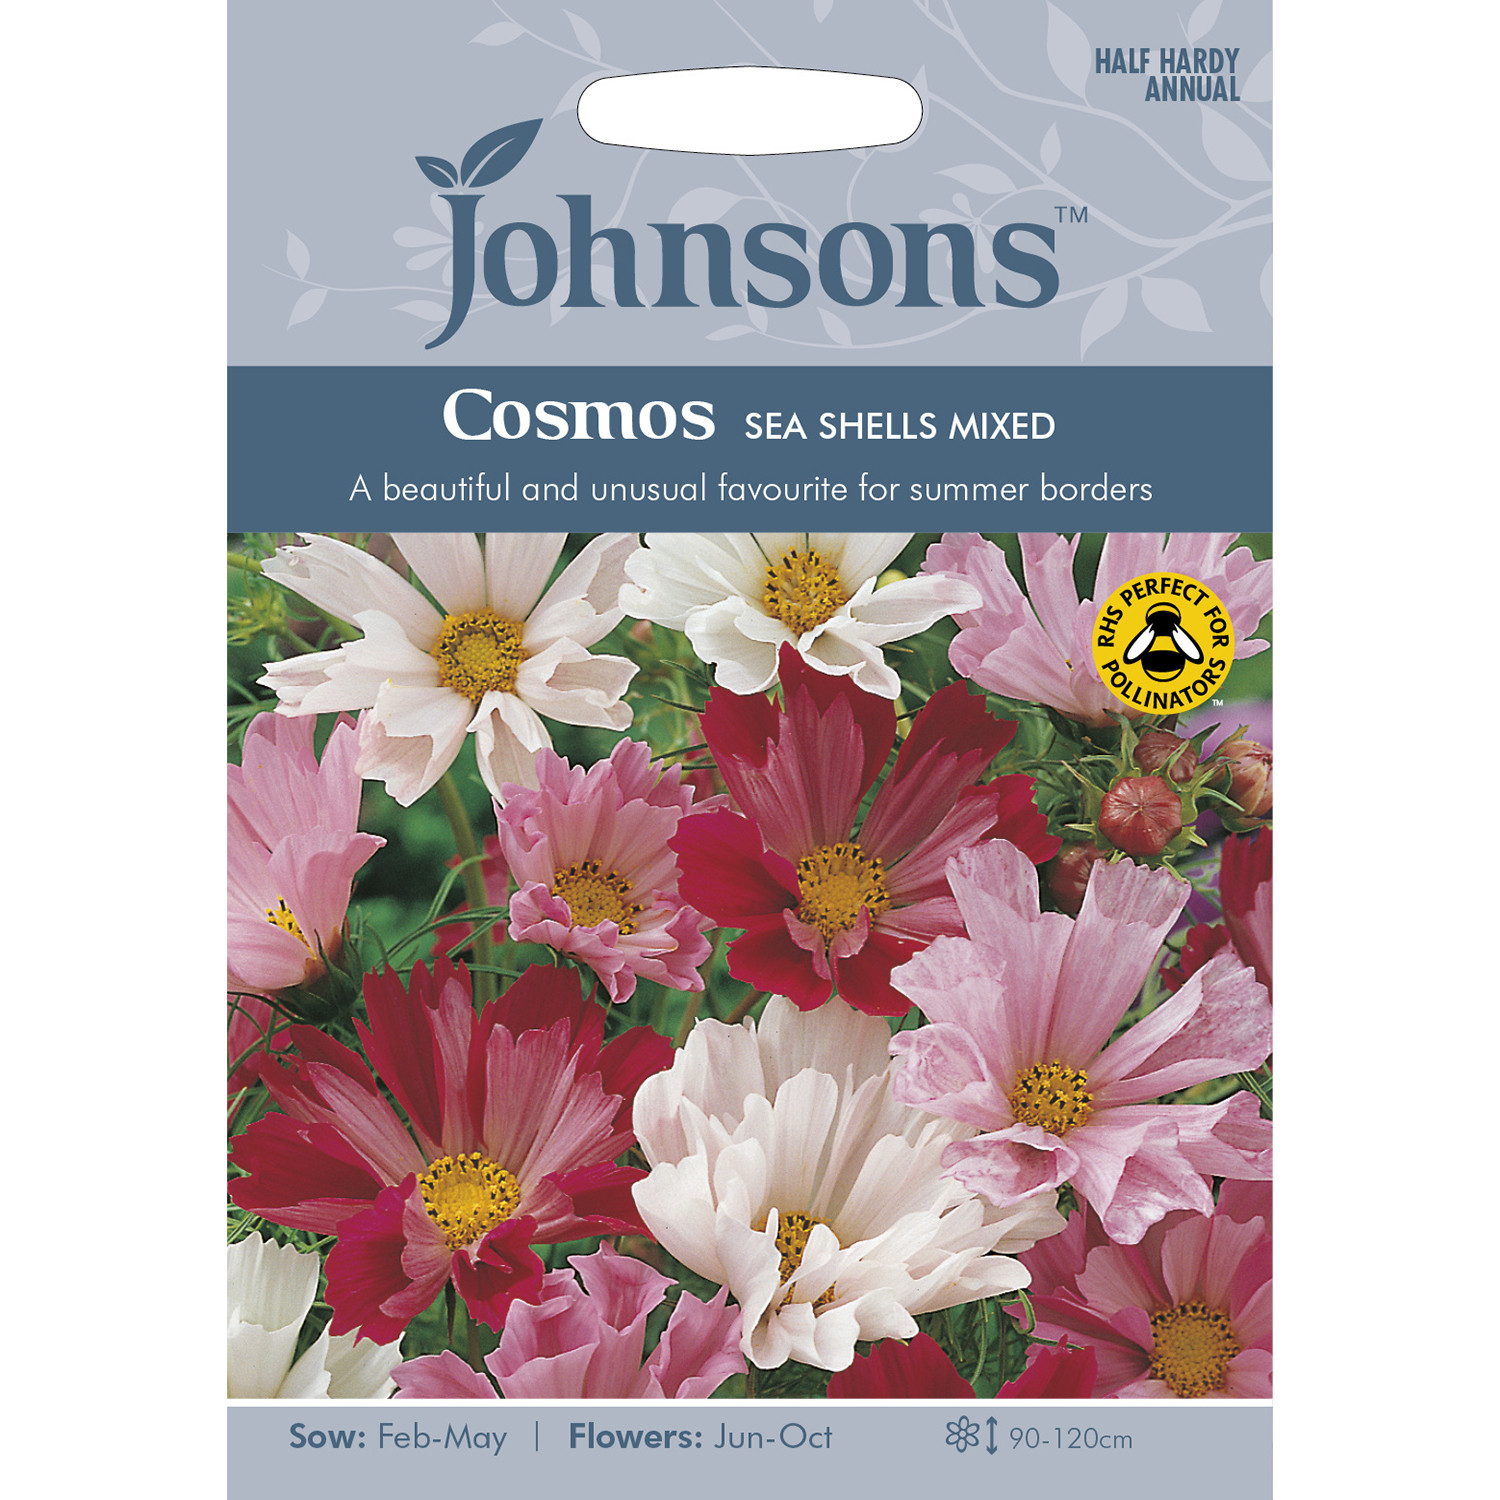 Johnsons Cosmos Sea Shells Mixed Flower Seeds Image 2